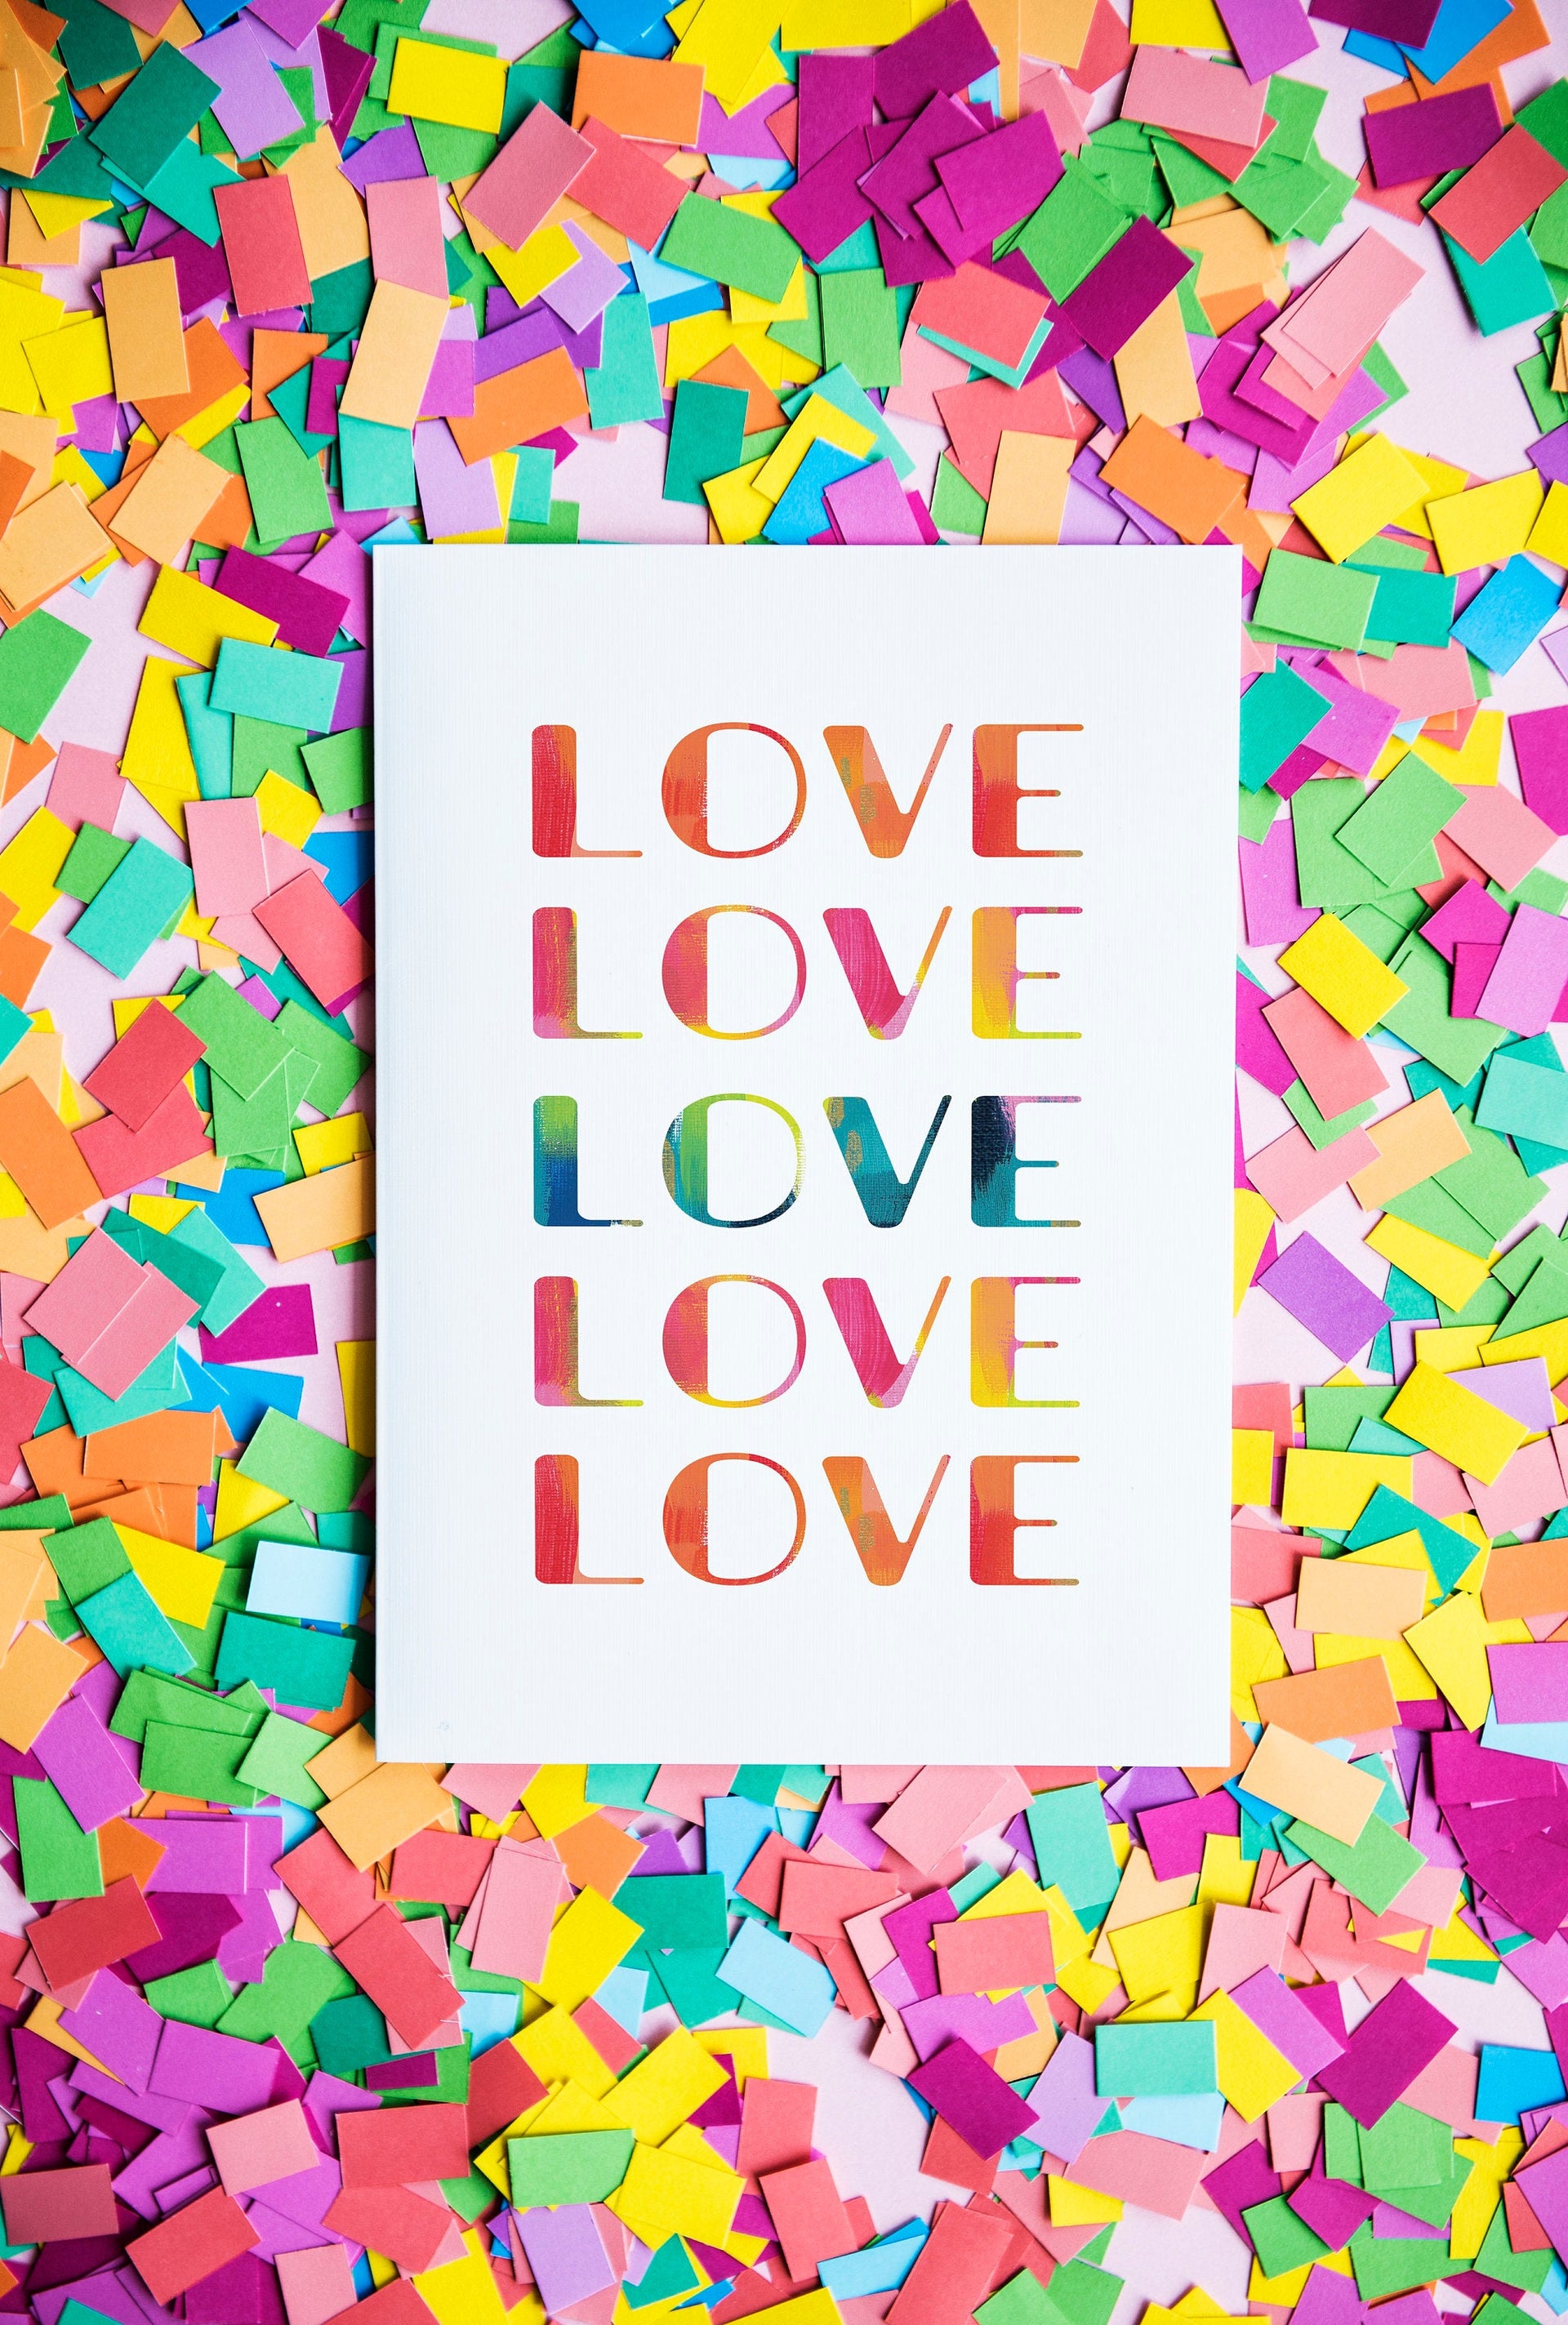 Love Rainbow Print with Confetti by Gert & Co